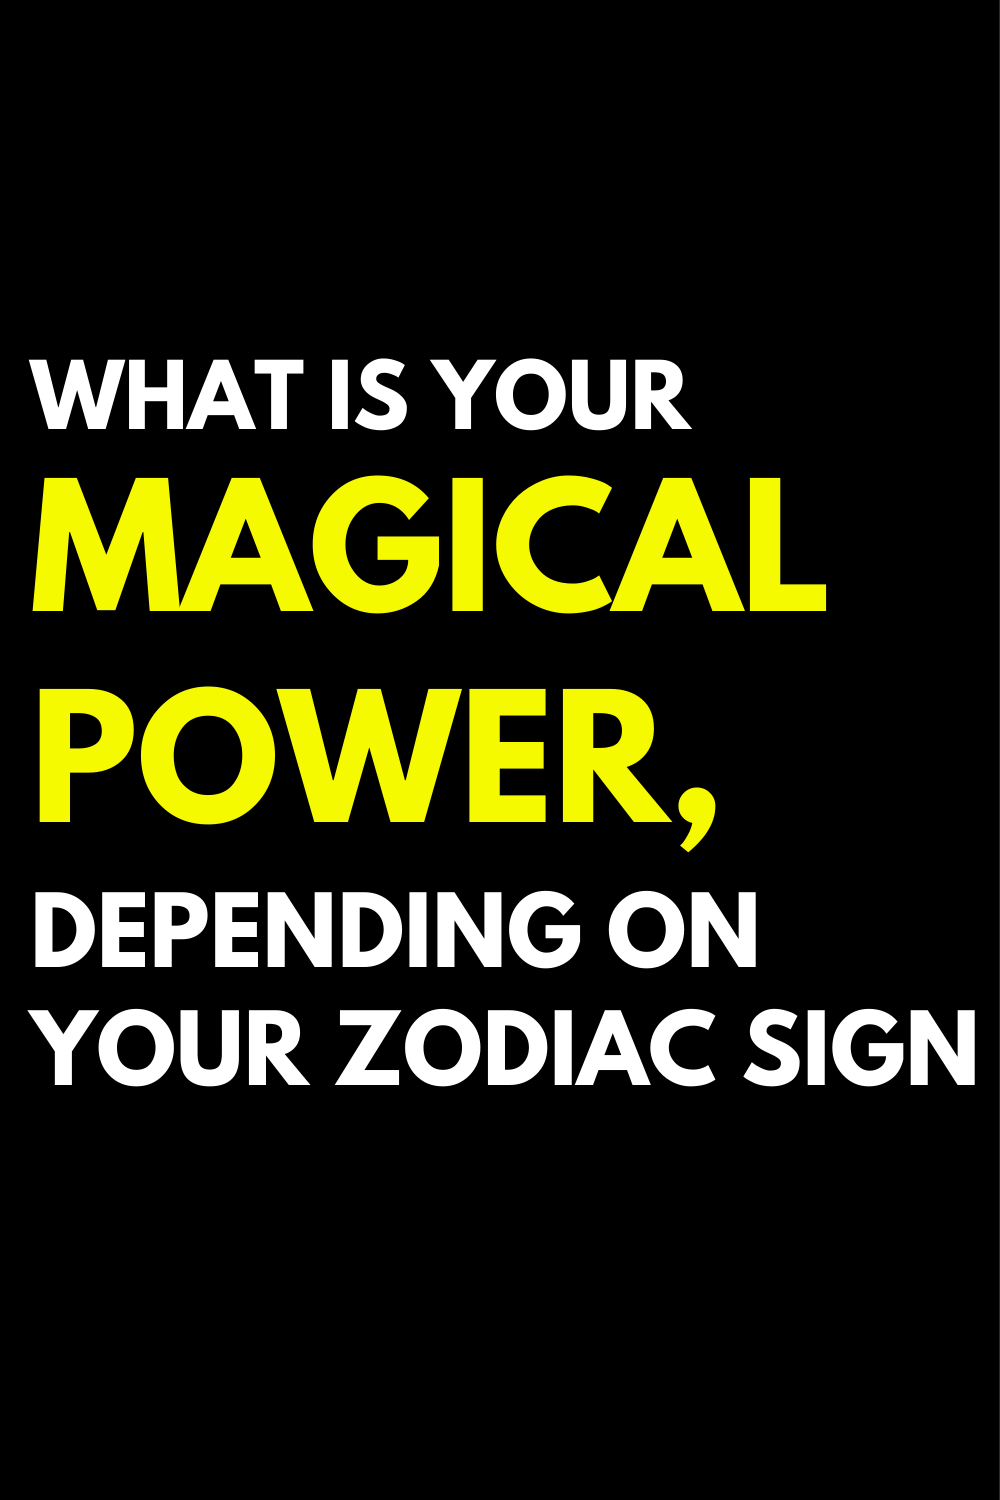 What is your magical power, depending on your zodiac sign